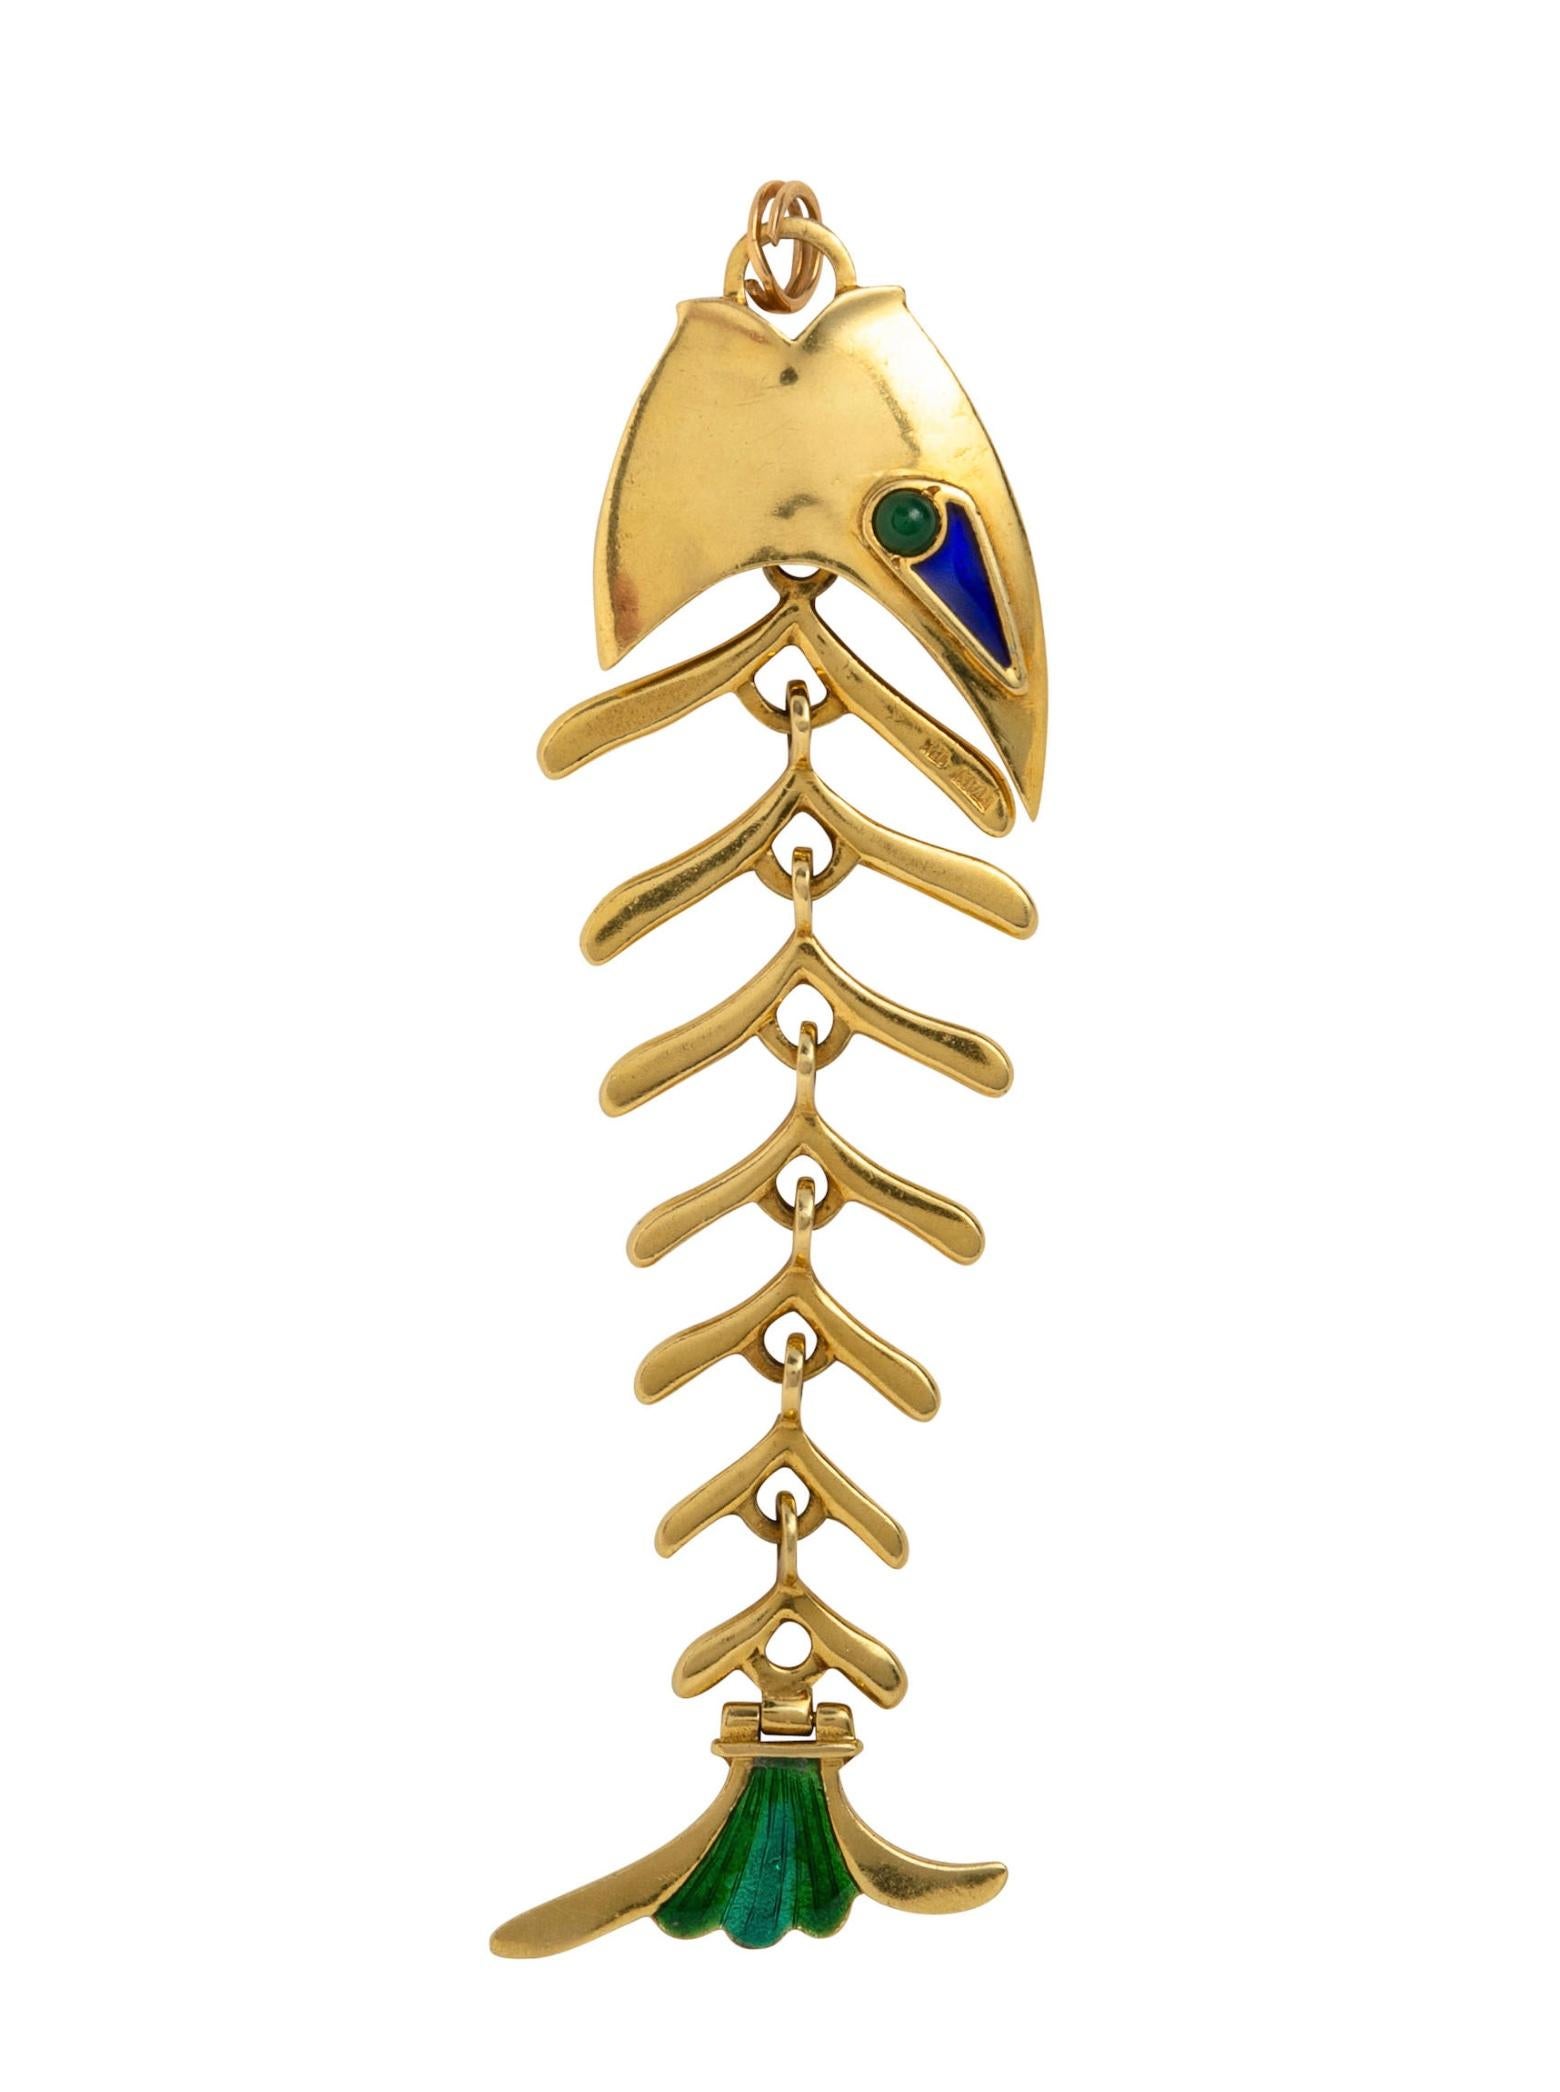 Tiffany & Co 18k gold fish bone movable drop pendant, decorated with green chrysoprase eyes and enamel.  Pendant measures 4.25